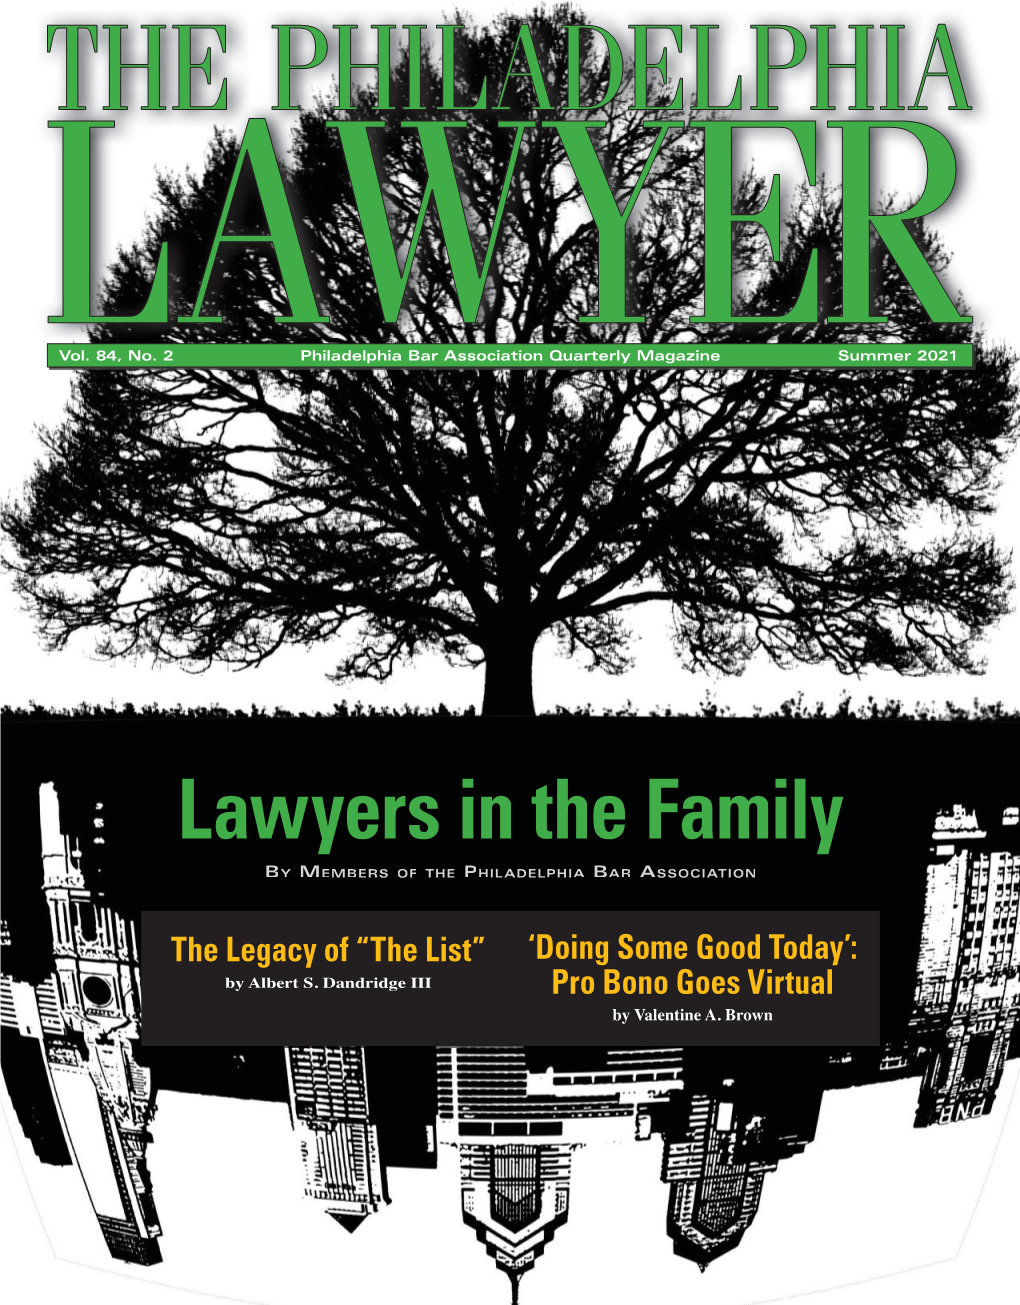 Lawyers in the Family by MEMBERS of the PHILADELPHIA BAR ASSOCIATION